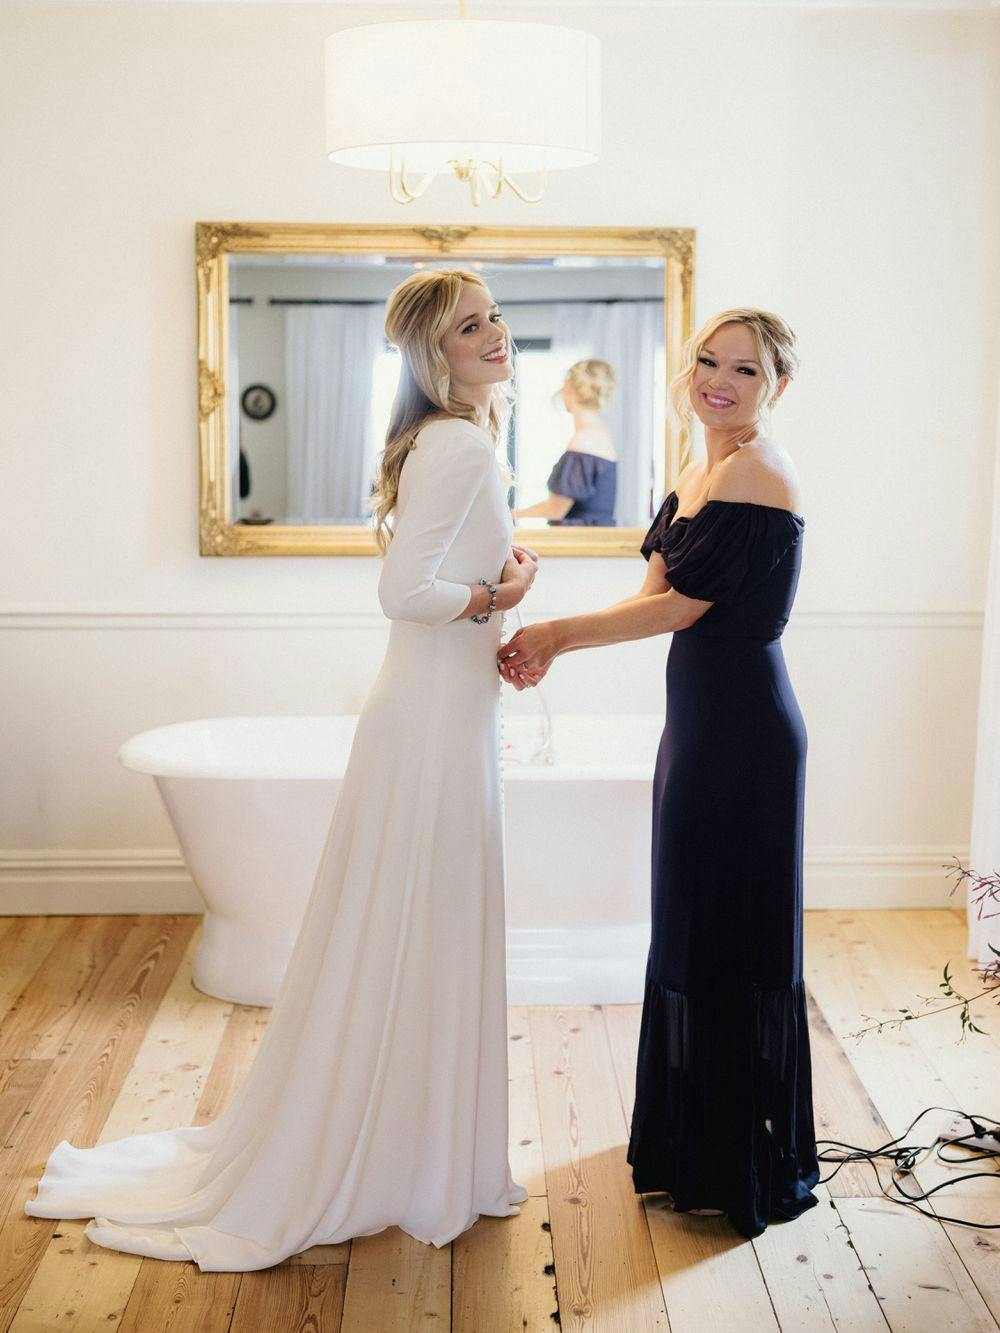 What To Wear Wedding Dress Shopping: Our Top Tips